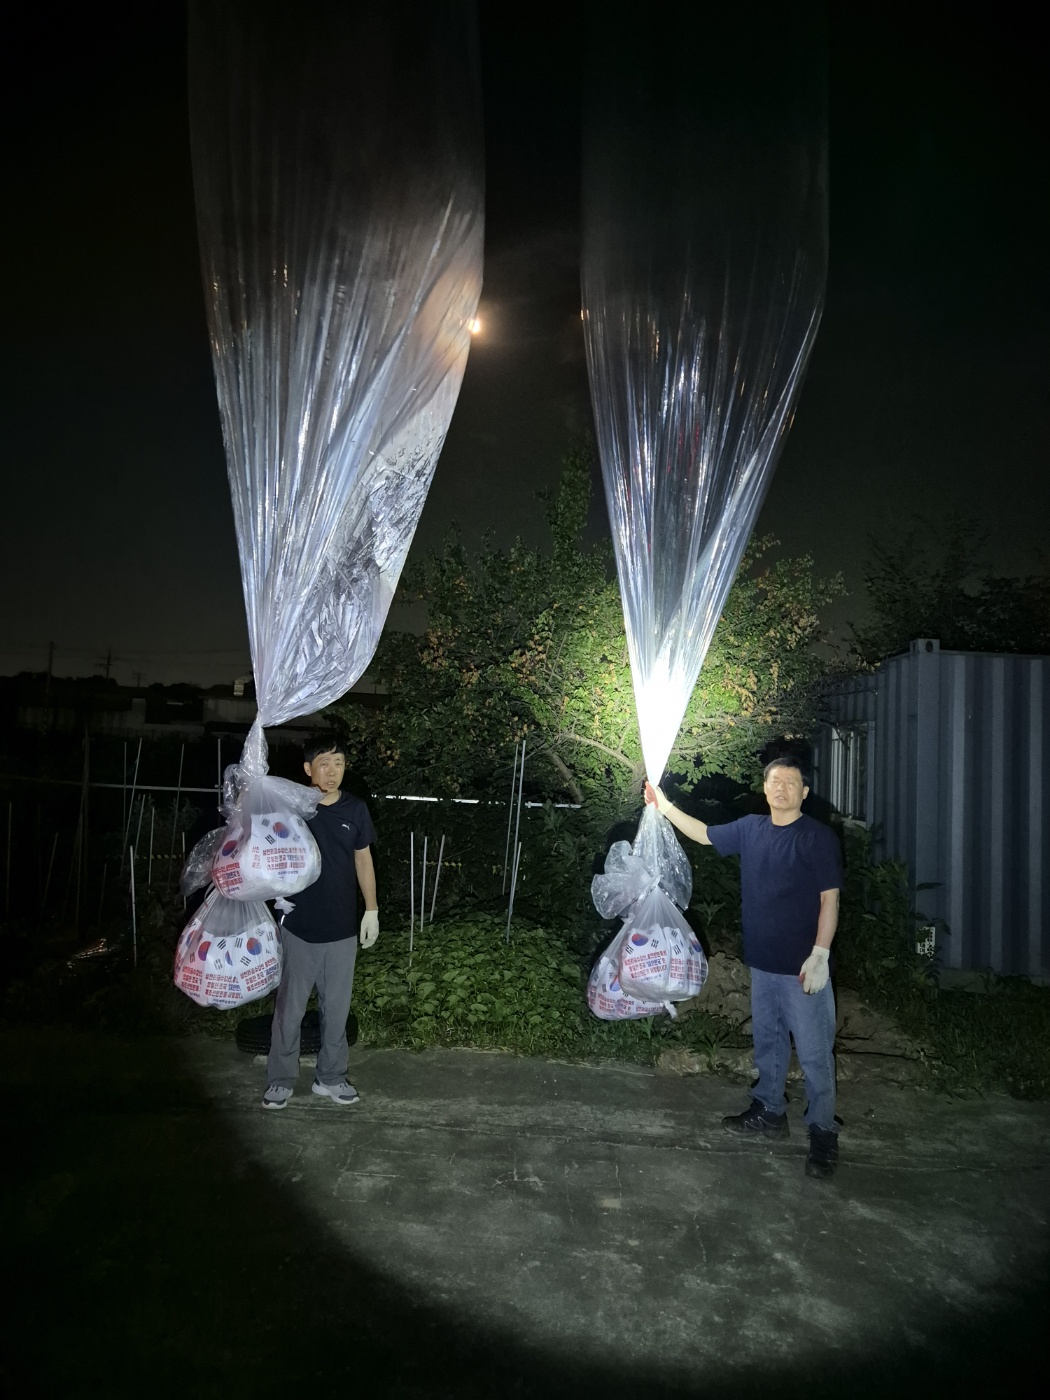 A North Korean defectors' group members send balloons carrying anti-Pyongyang leaflets to North Korea in the South Korean border city of Paju on Thursday. (Fighters for a Free North Korea)